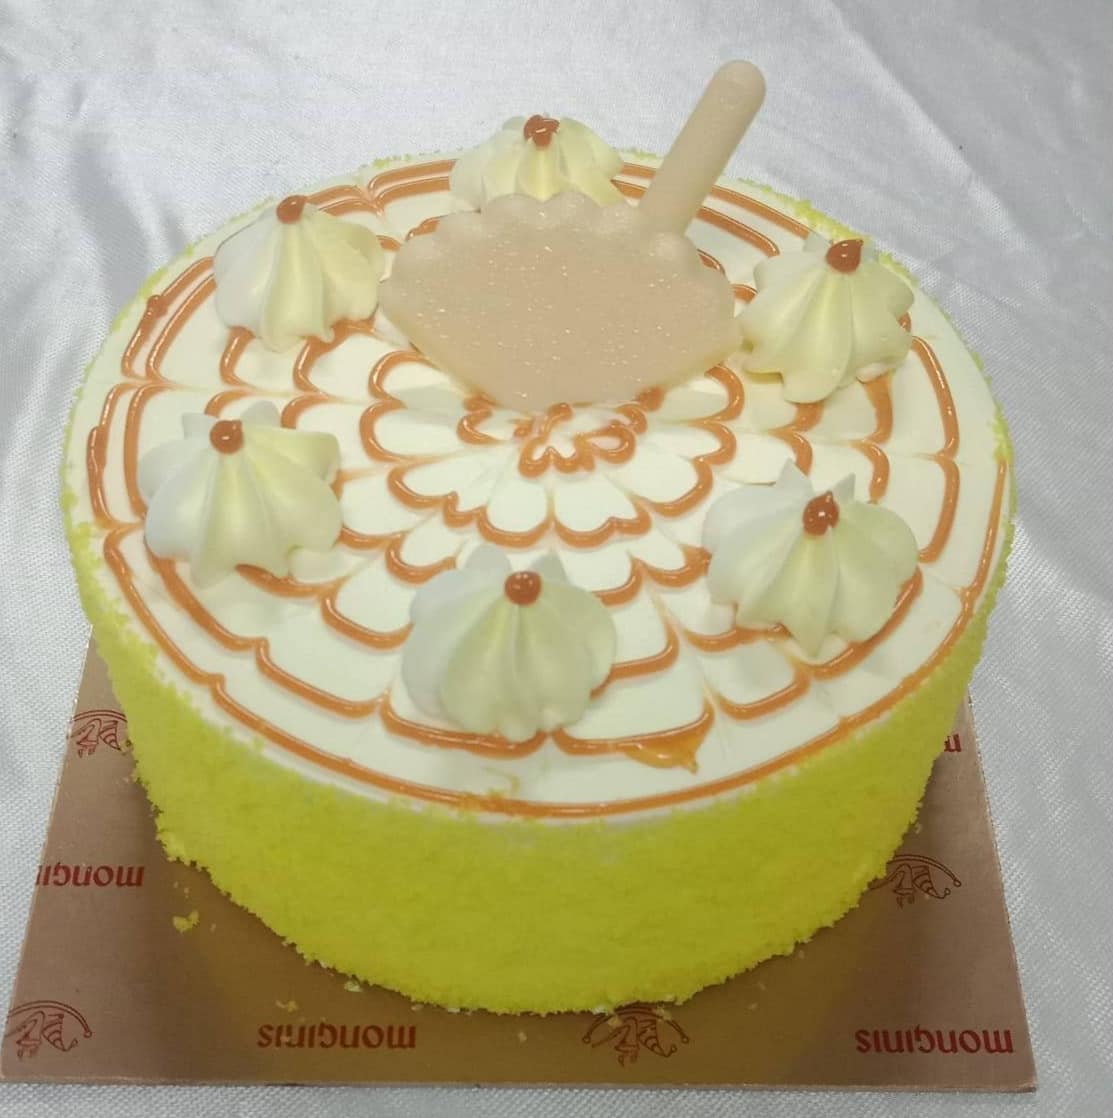 Monginis Cake Shop in Mecheda,Midnapore - Best Cake Shops in Midnapore -  Justdial